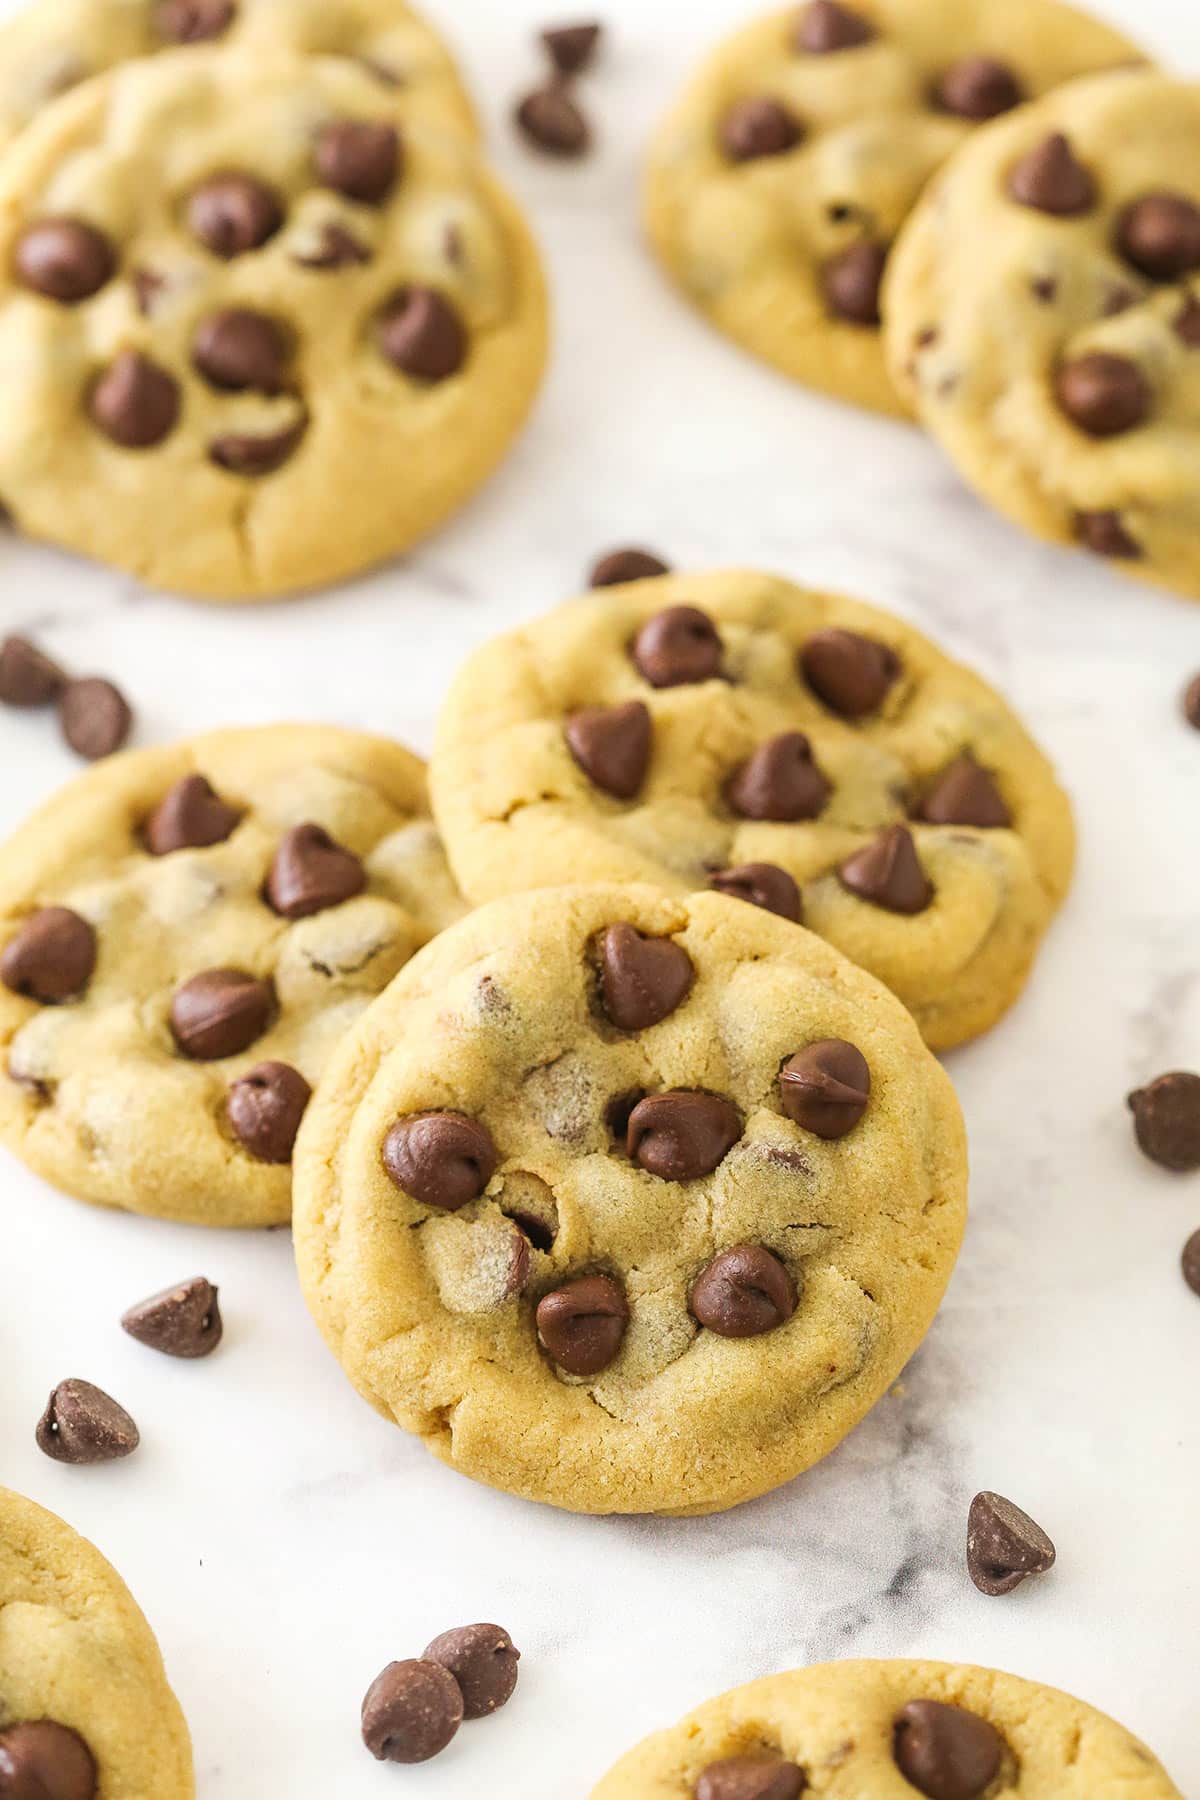 Peanut butter chocolate chip cookies on a counter with chocolate chips sprinkled around